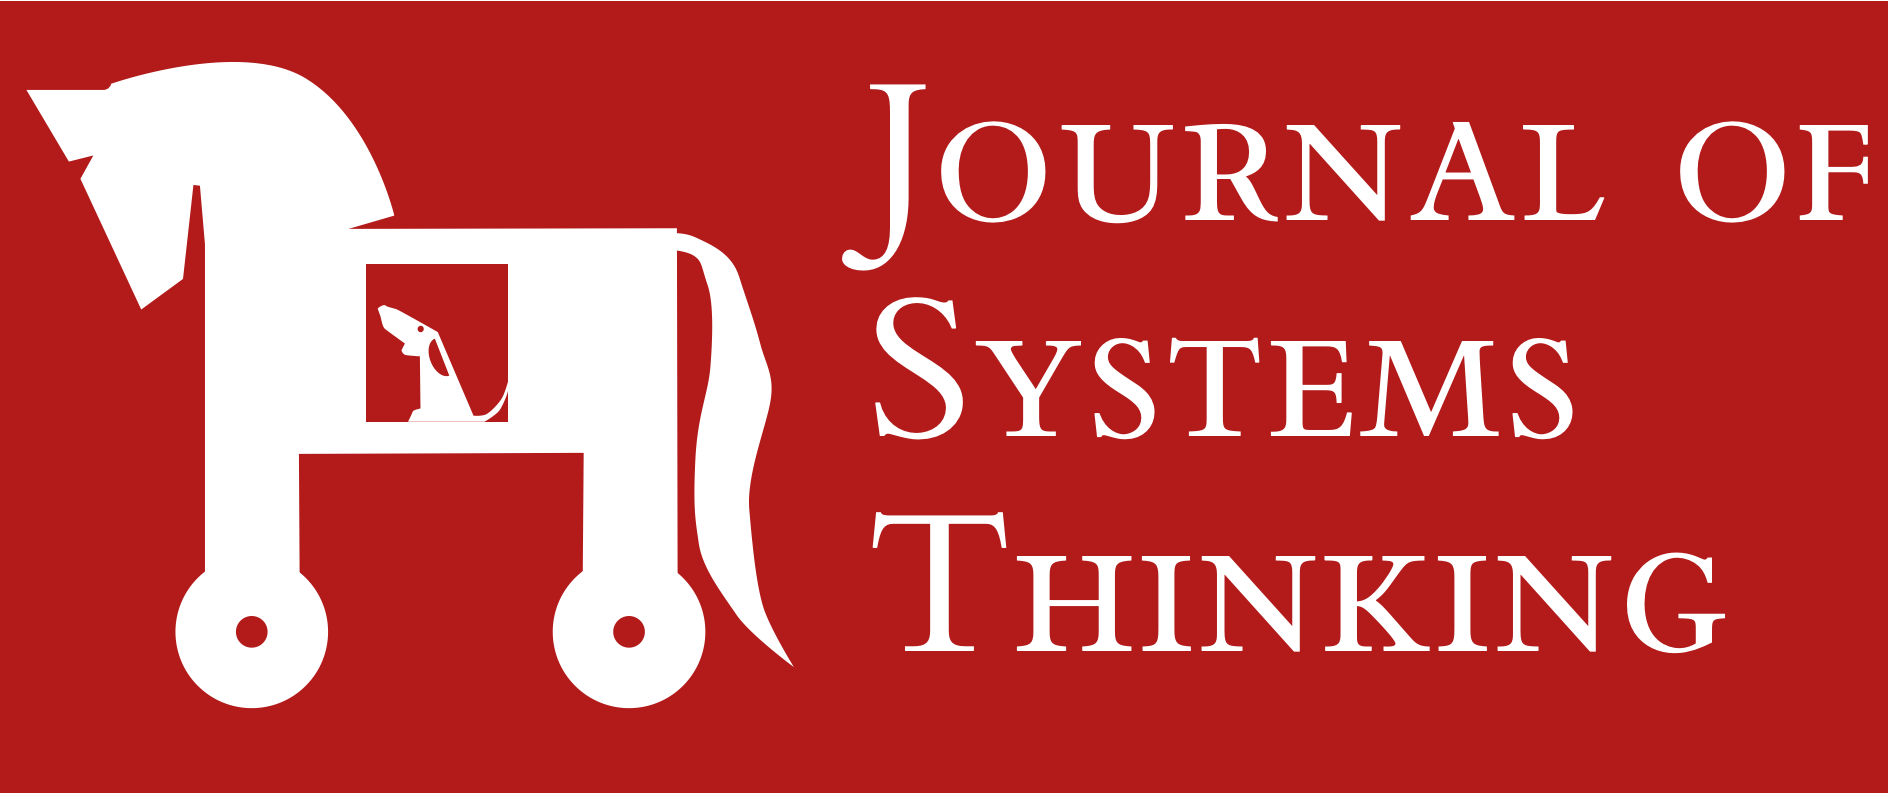 Journal of Systems Thinking logo